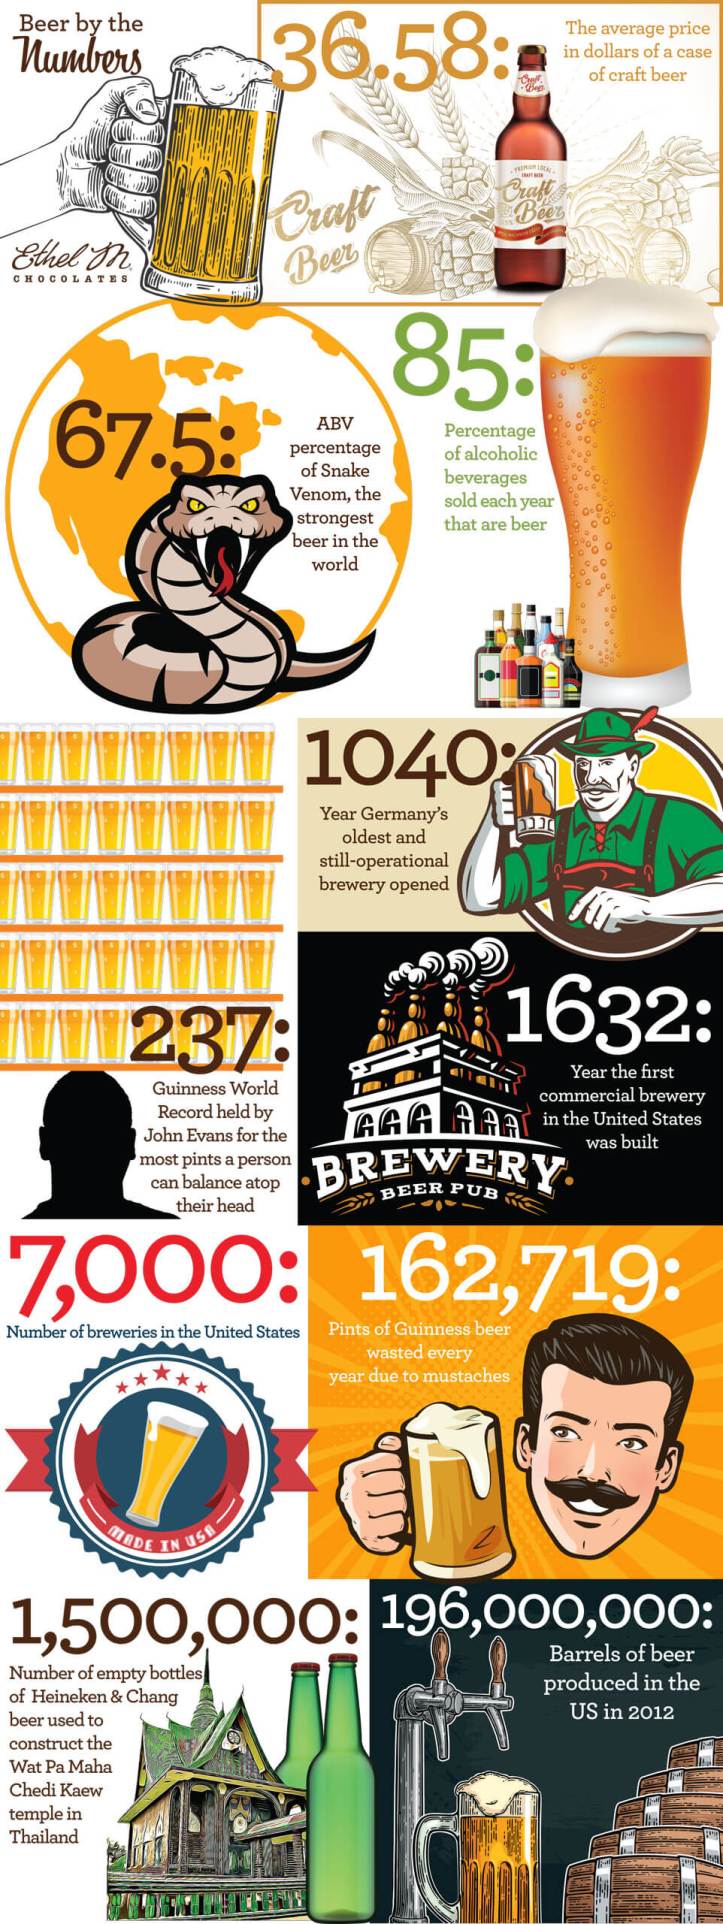 beer by the numbers